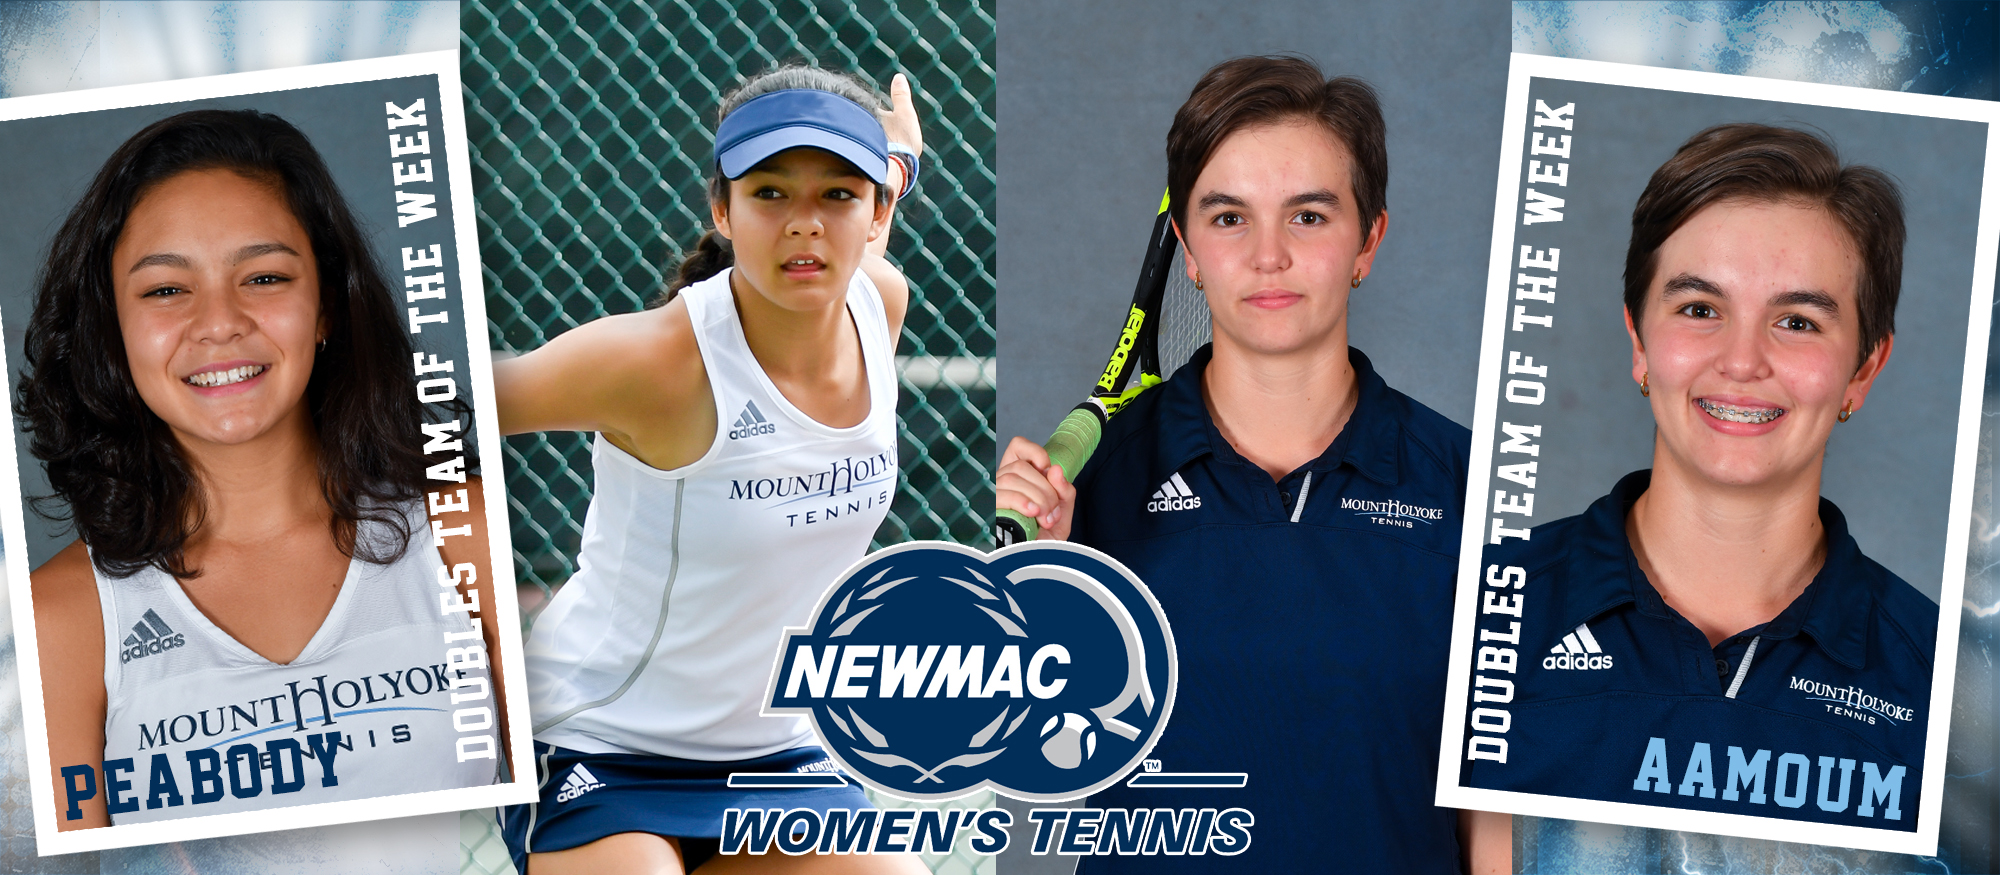 Photo featuring Lyons tennis players Catherine Peabody (left) and Annissa Aamoum (right) for being named NEWMAC Doubles Team of the Week on Mar. 18th, 2019.